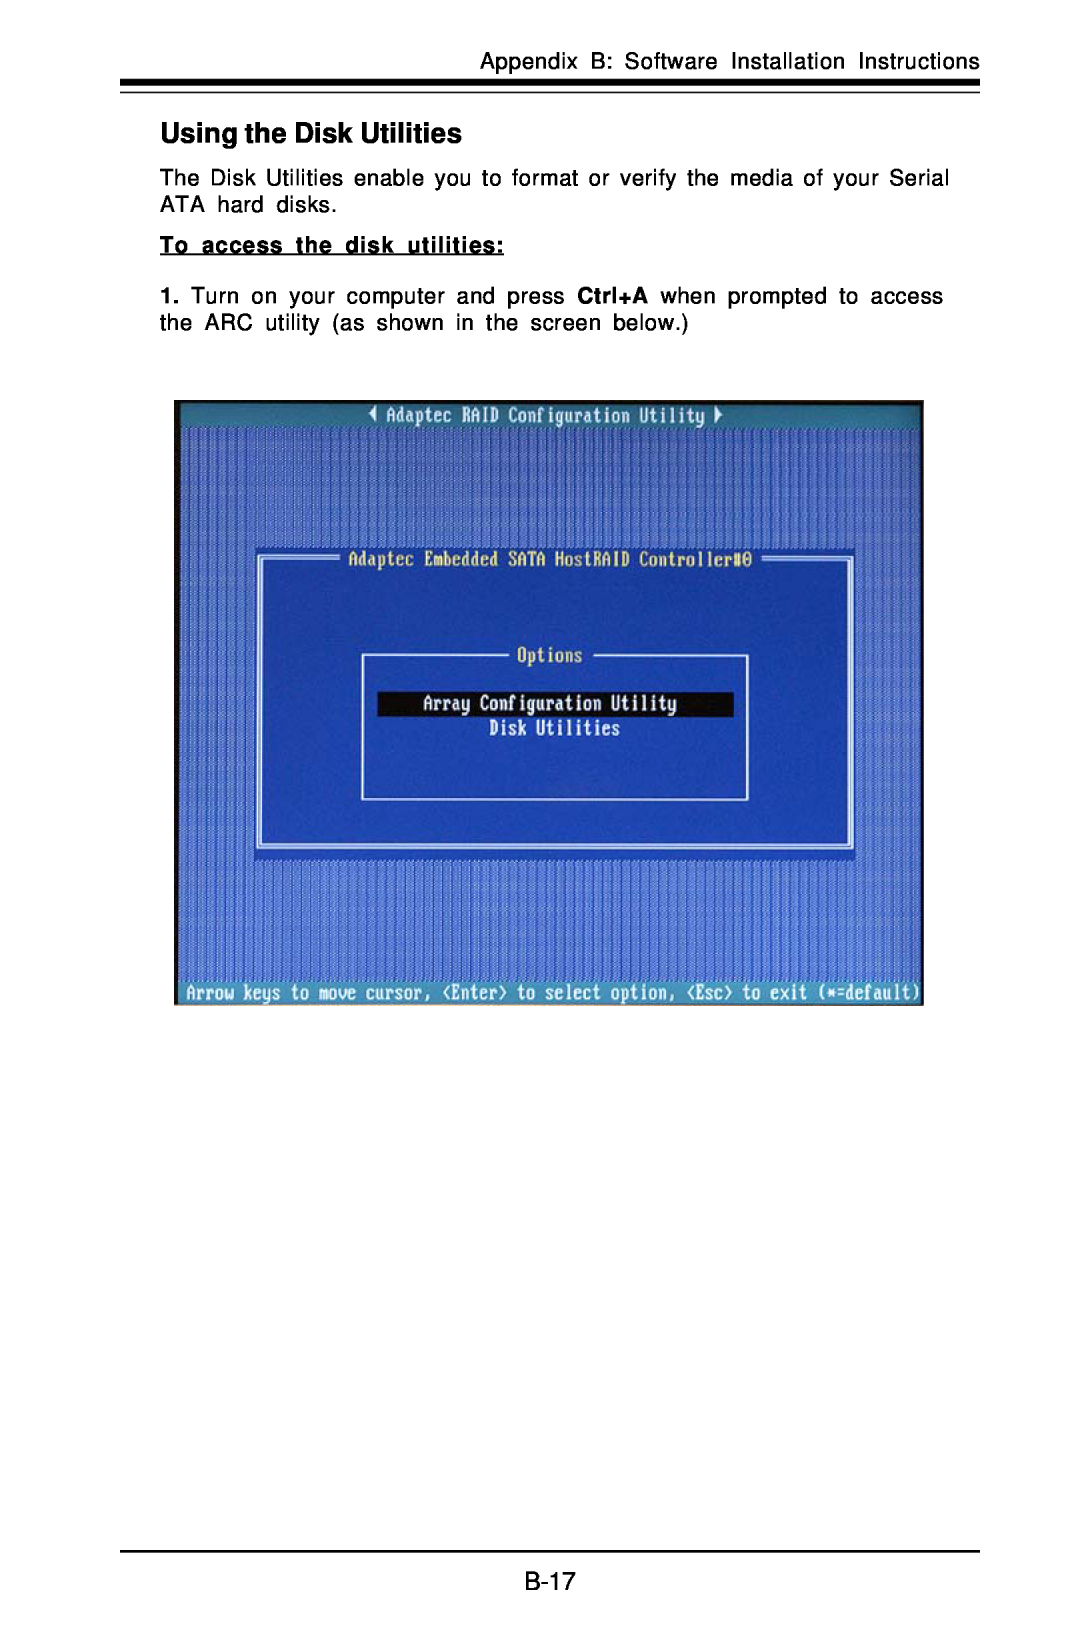 SUPER MICRO Computer X6DHE-G2, X6DH8-G2 manual Using the Disk Utilities, B-17, To access the disk utilities 